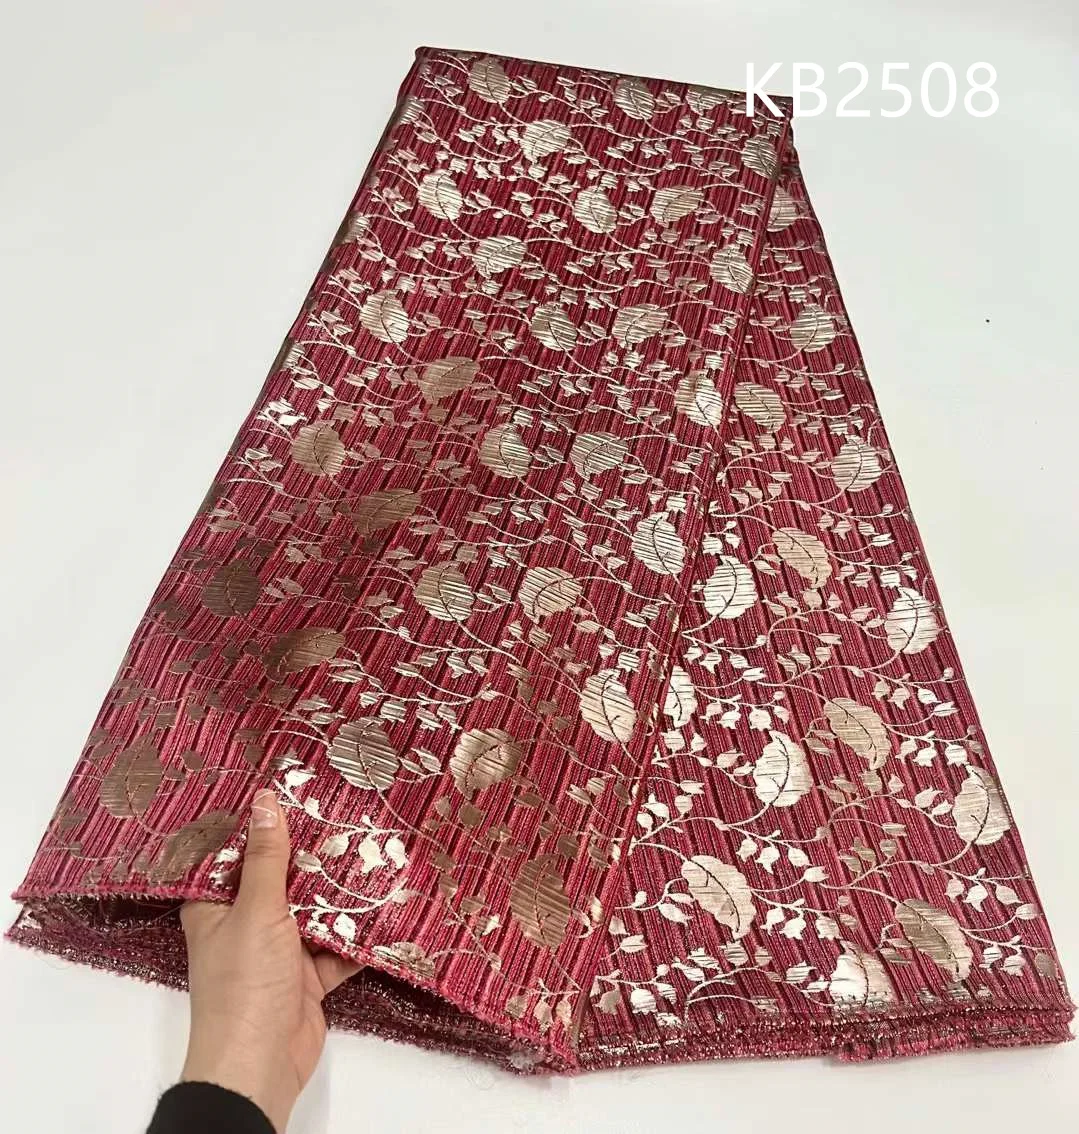 latest-african-jacquard-gild-fabric-nigerian-french-tulle-lace-high-quality-2023-brocade-lace-fabric-for-wedding-party-kb2508